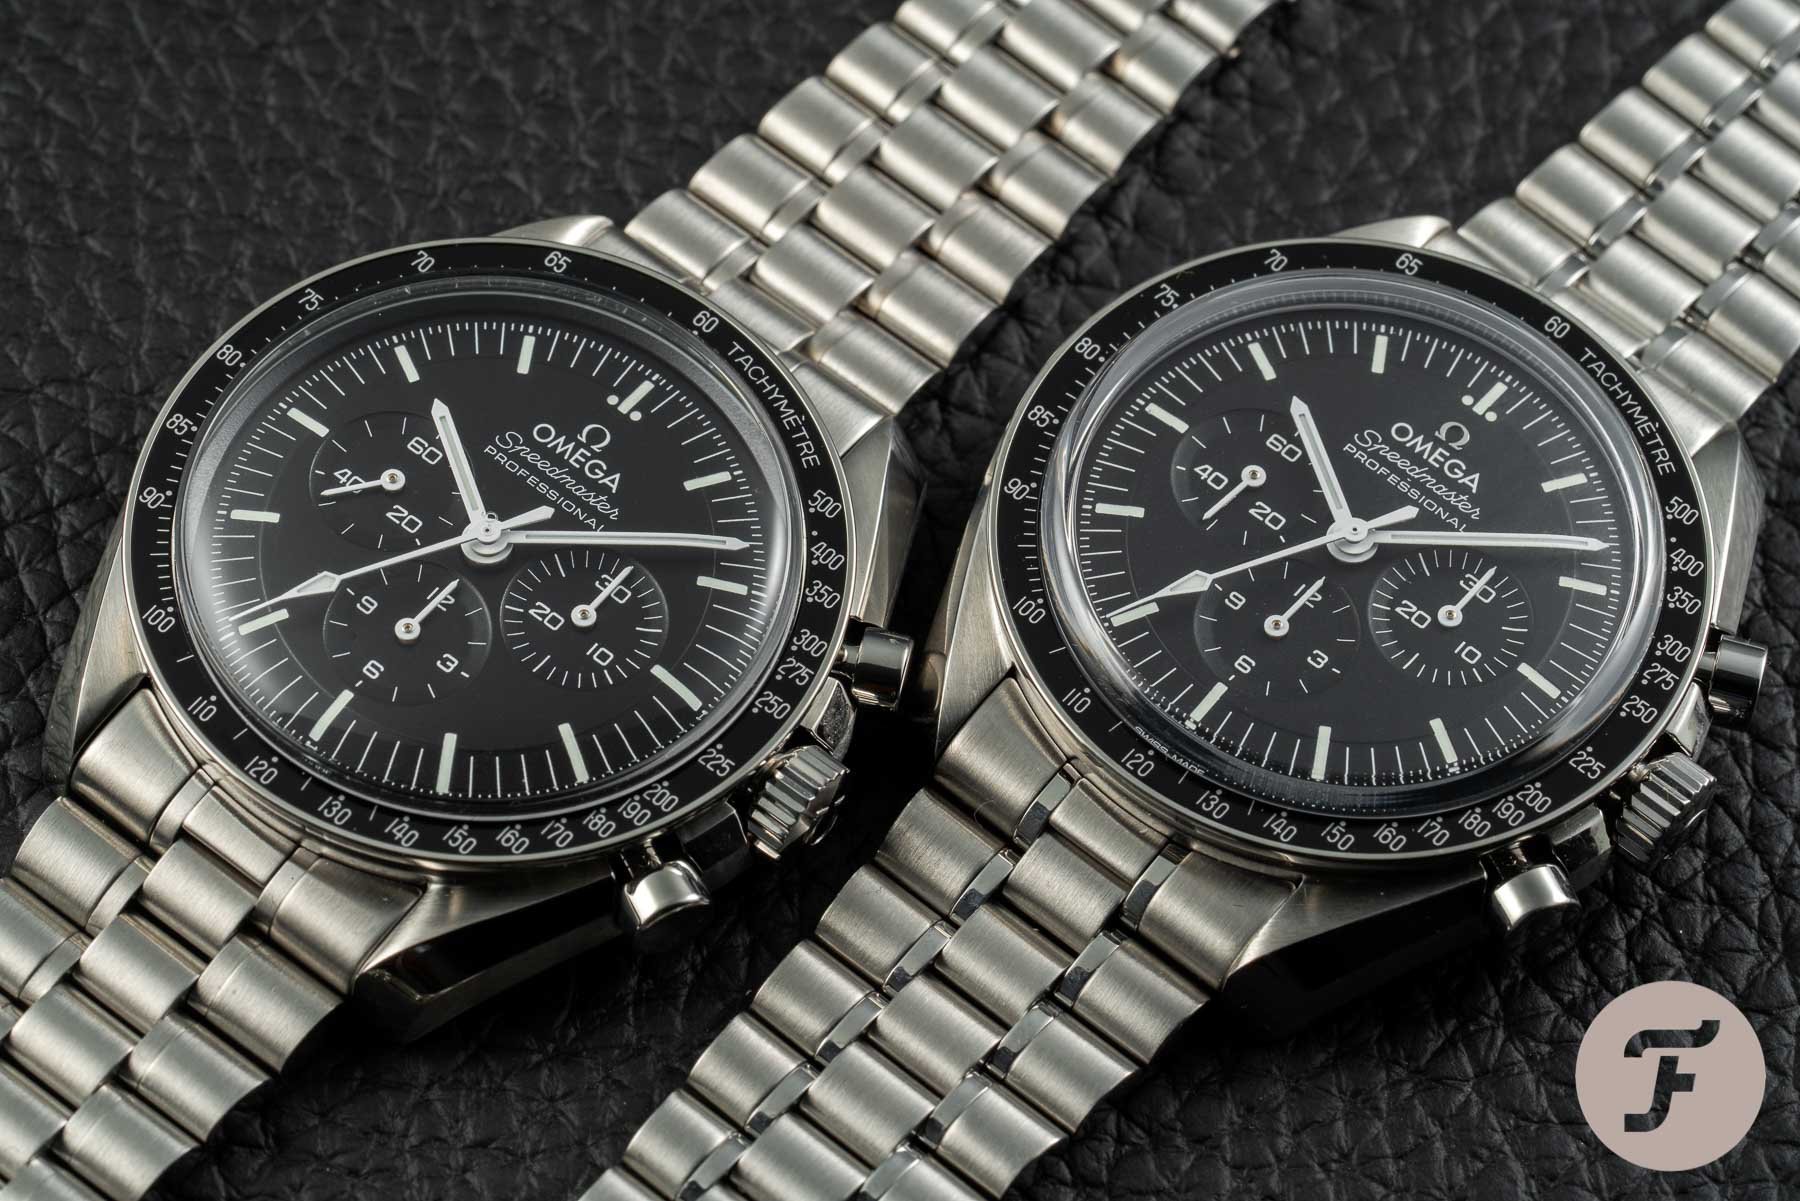 OMEGA Speedmaster Moonwatch Professional Chronograph: Review - The